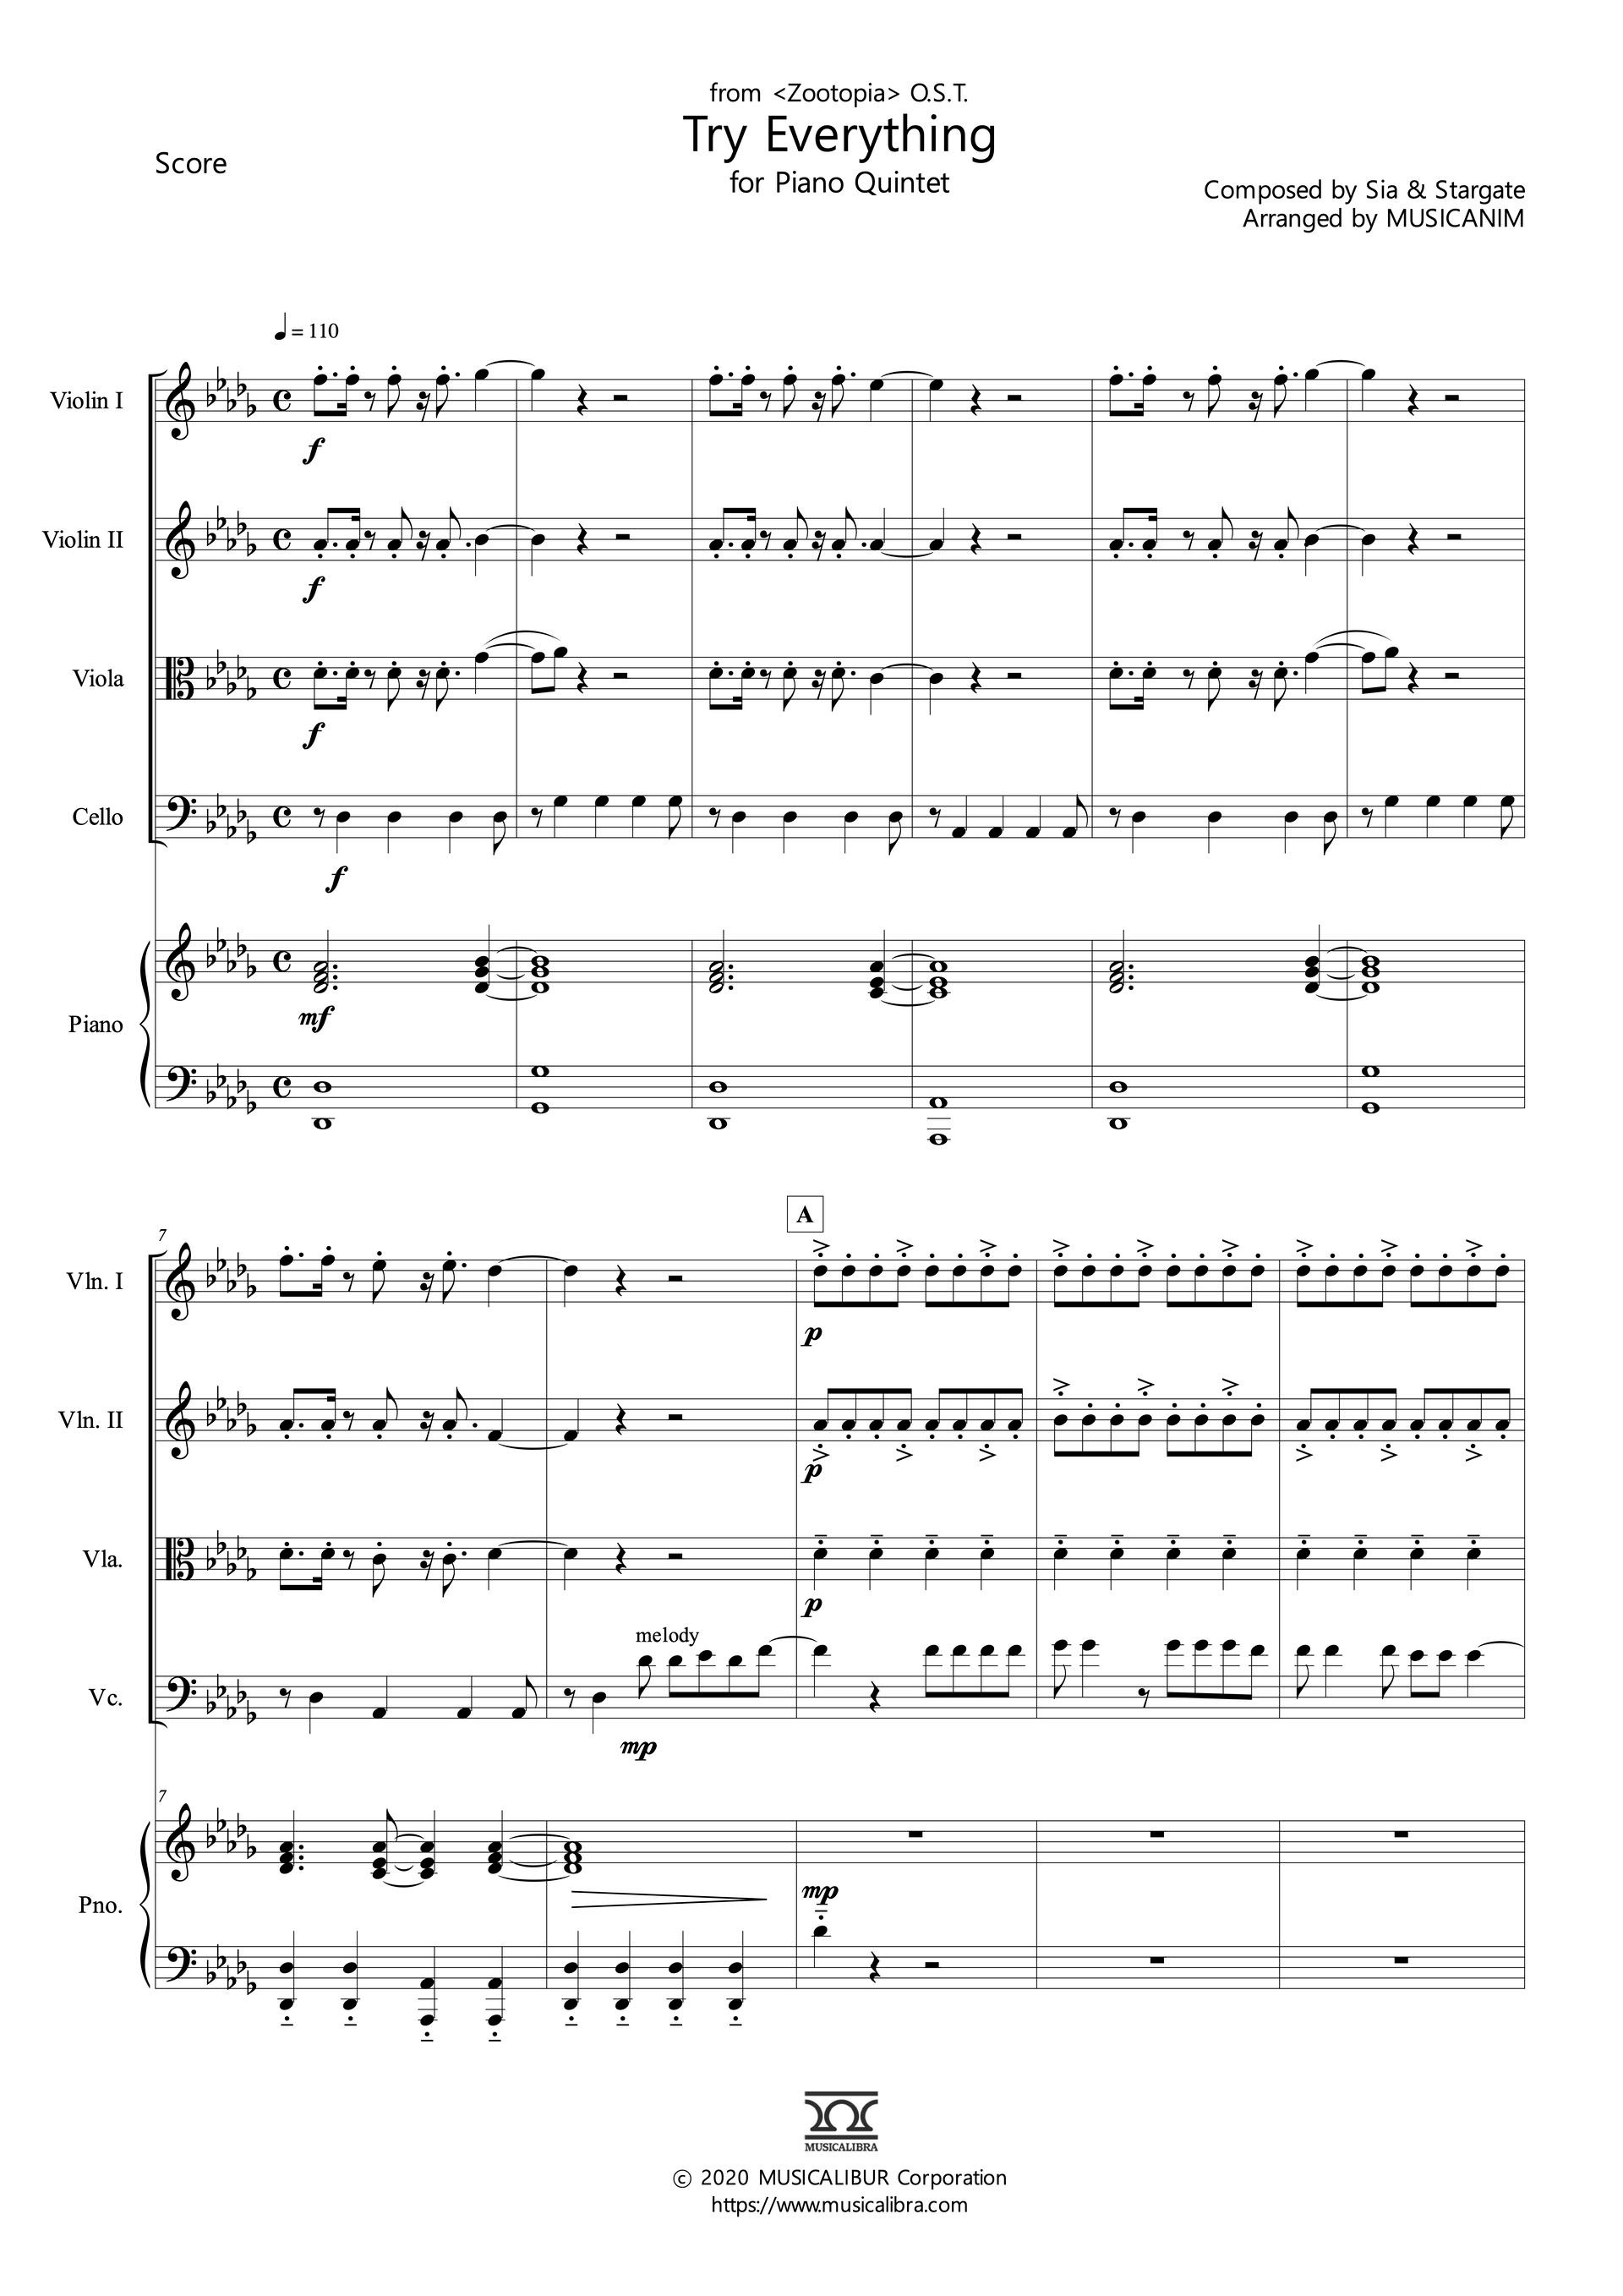 Sheet music of Try Everything from Zootopia arranged for violins, viola, cello and piano quintet preview page 1